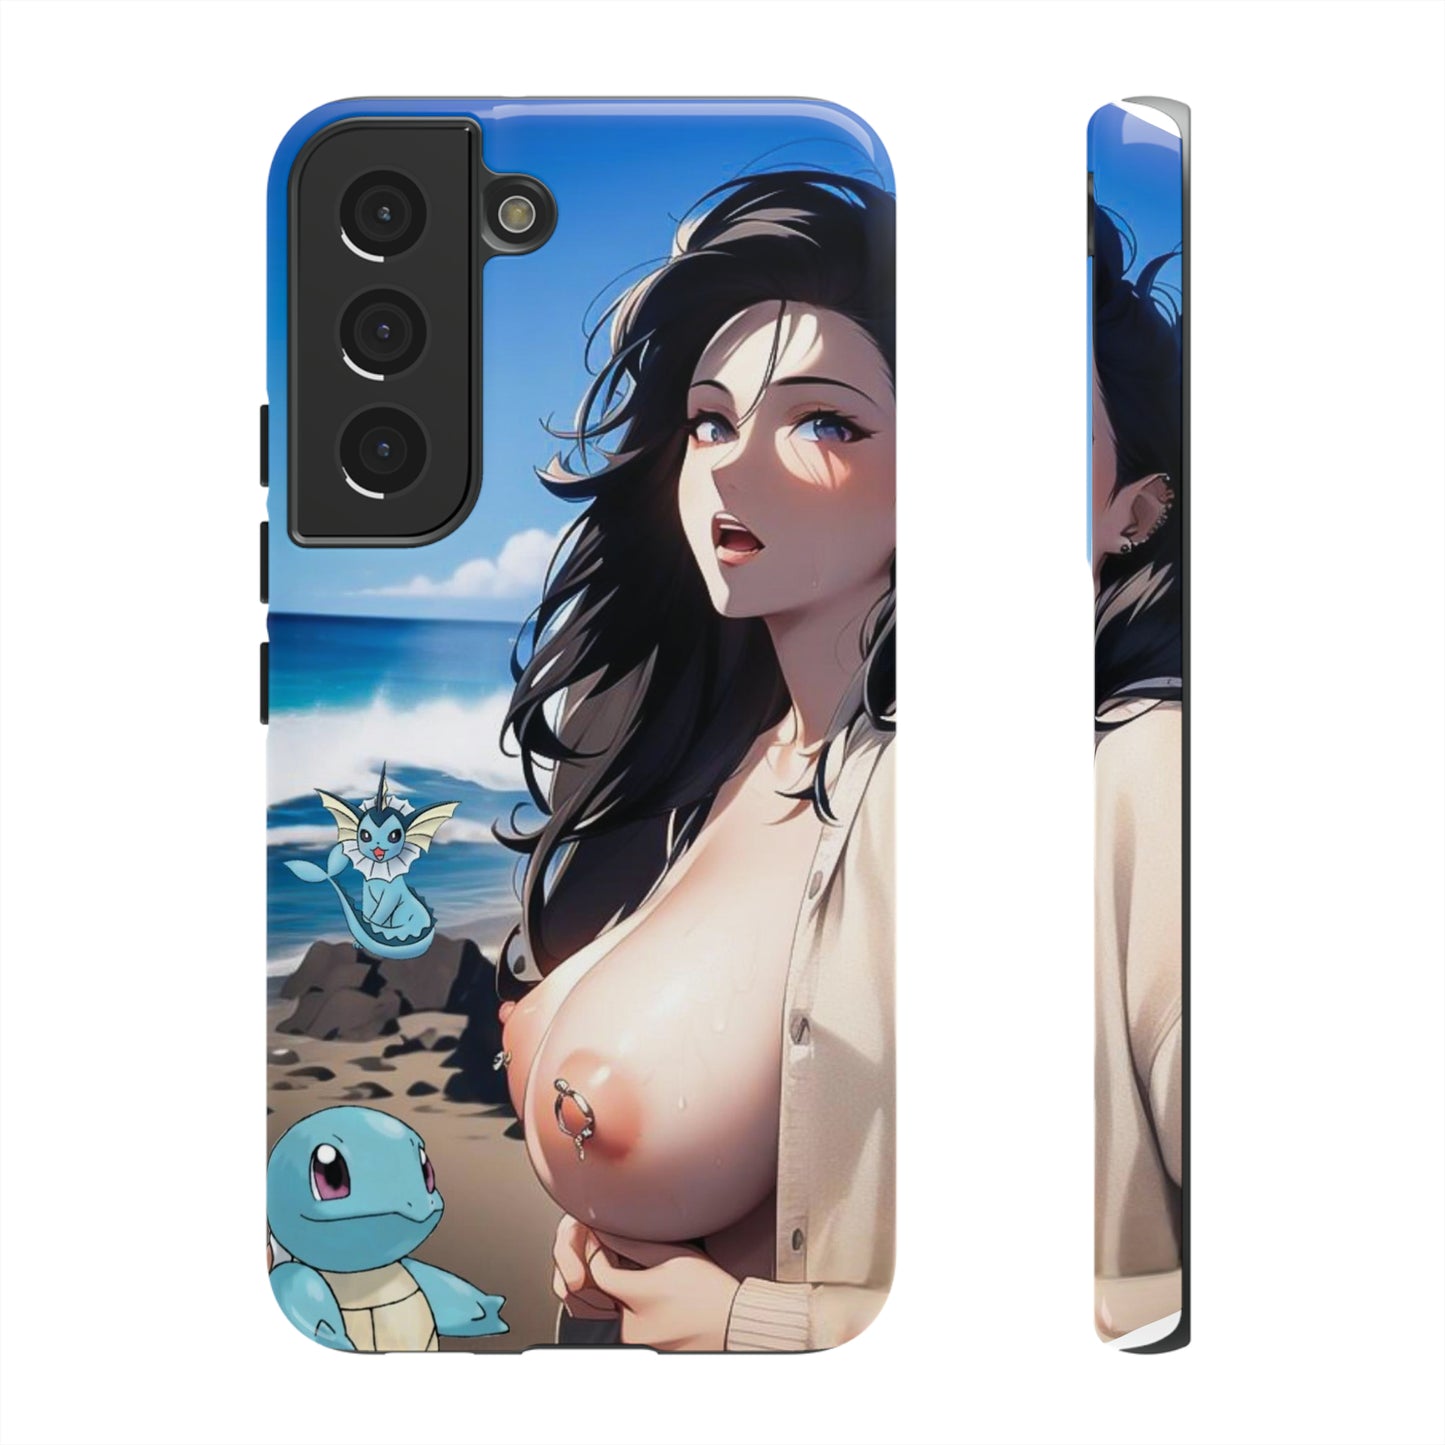 The Squirter- Anime Style Art Tough Cases